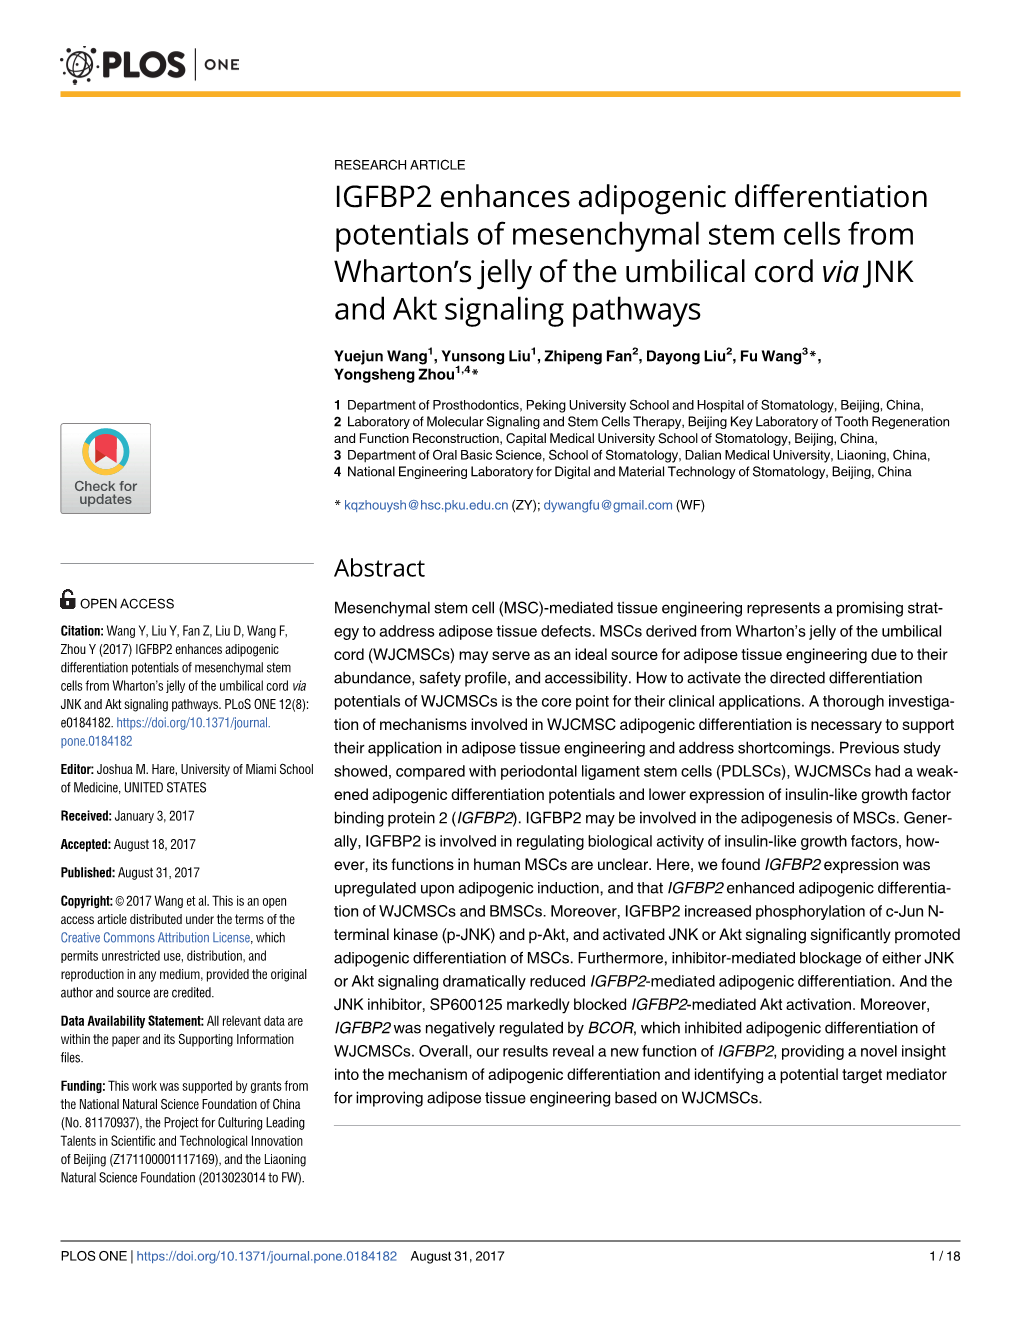 IGFBP2 Enhances Adipogenic Differentiation Potentials of Mesenchymal Stem Cells from Wharton’S Jelly of the Umbilical Cord Via JNK and Akt Signaling Pathways